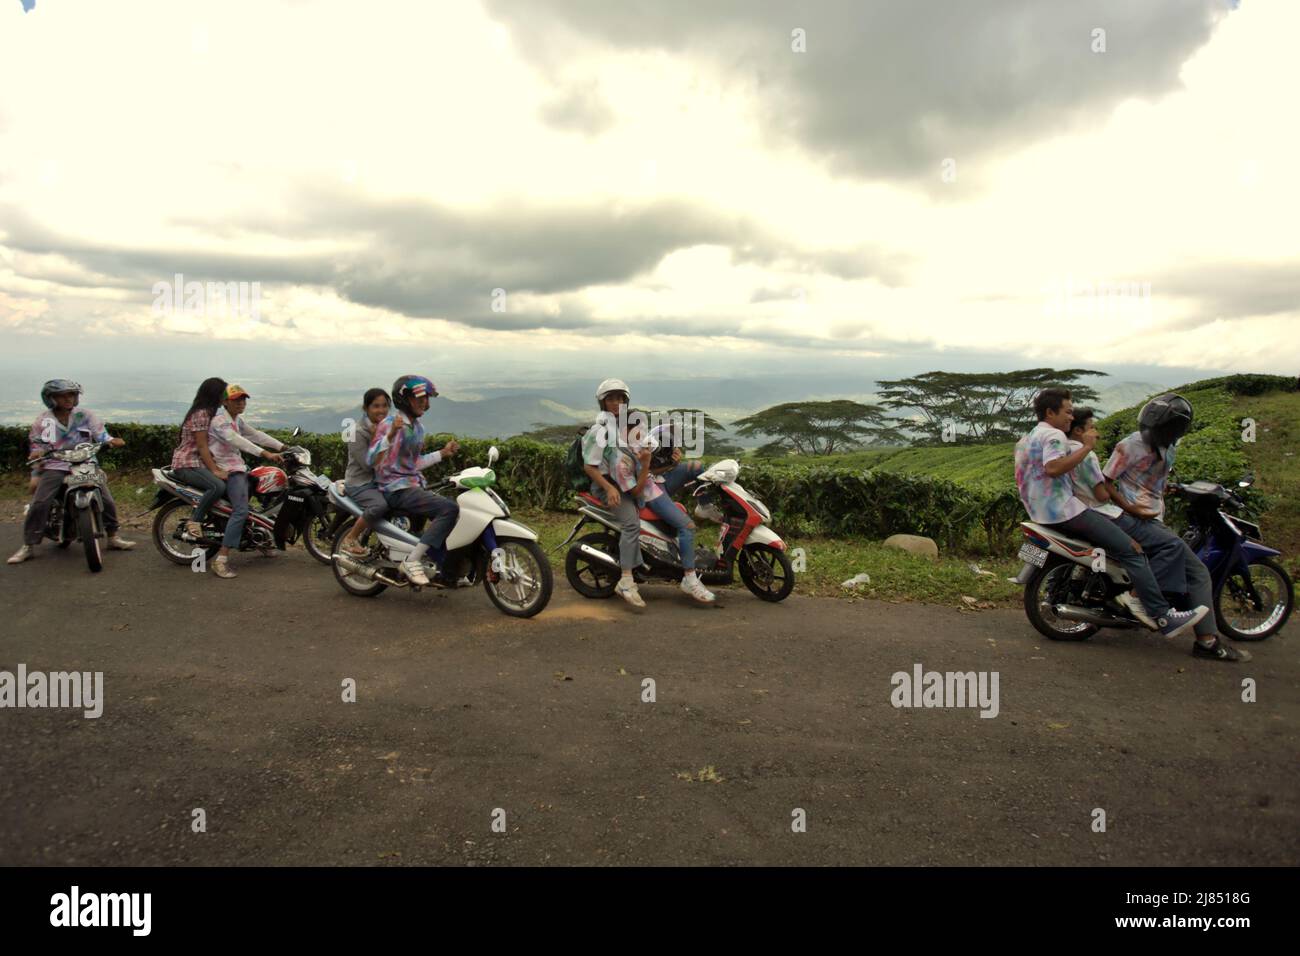 Portrait of high school students as they are celebrating their school graduation by riding through tea plantation in a convoy, wearing school uniforms that had been painted as a tradition, in Pagar Alam, South Sumatra, Indonesia. Stock Photo